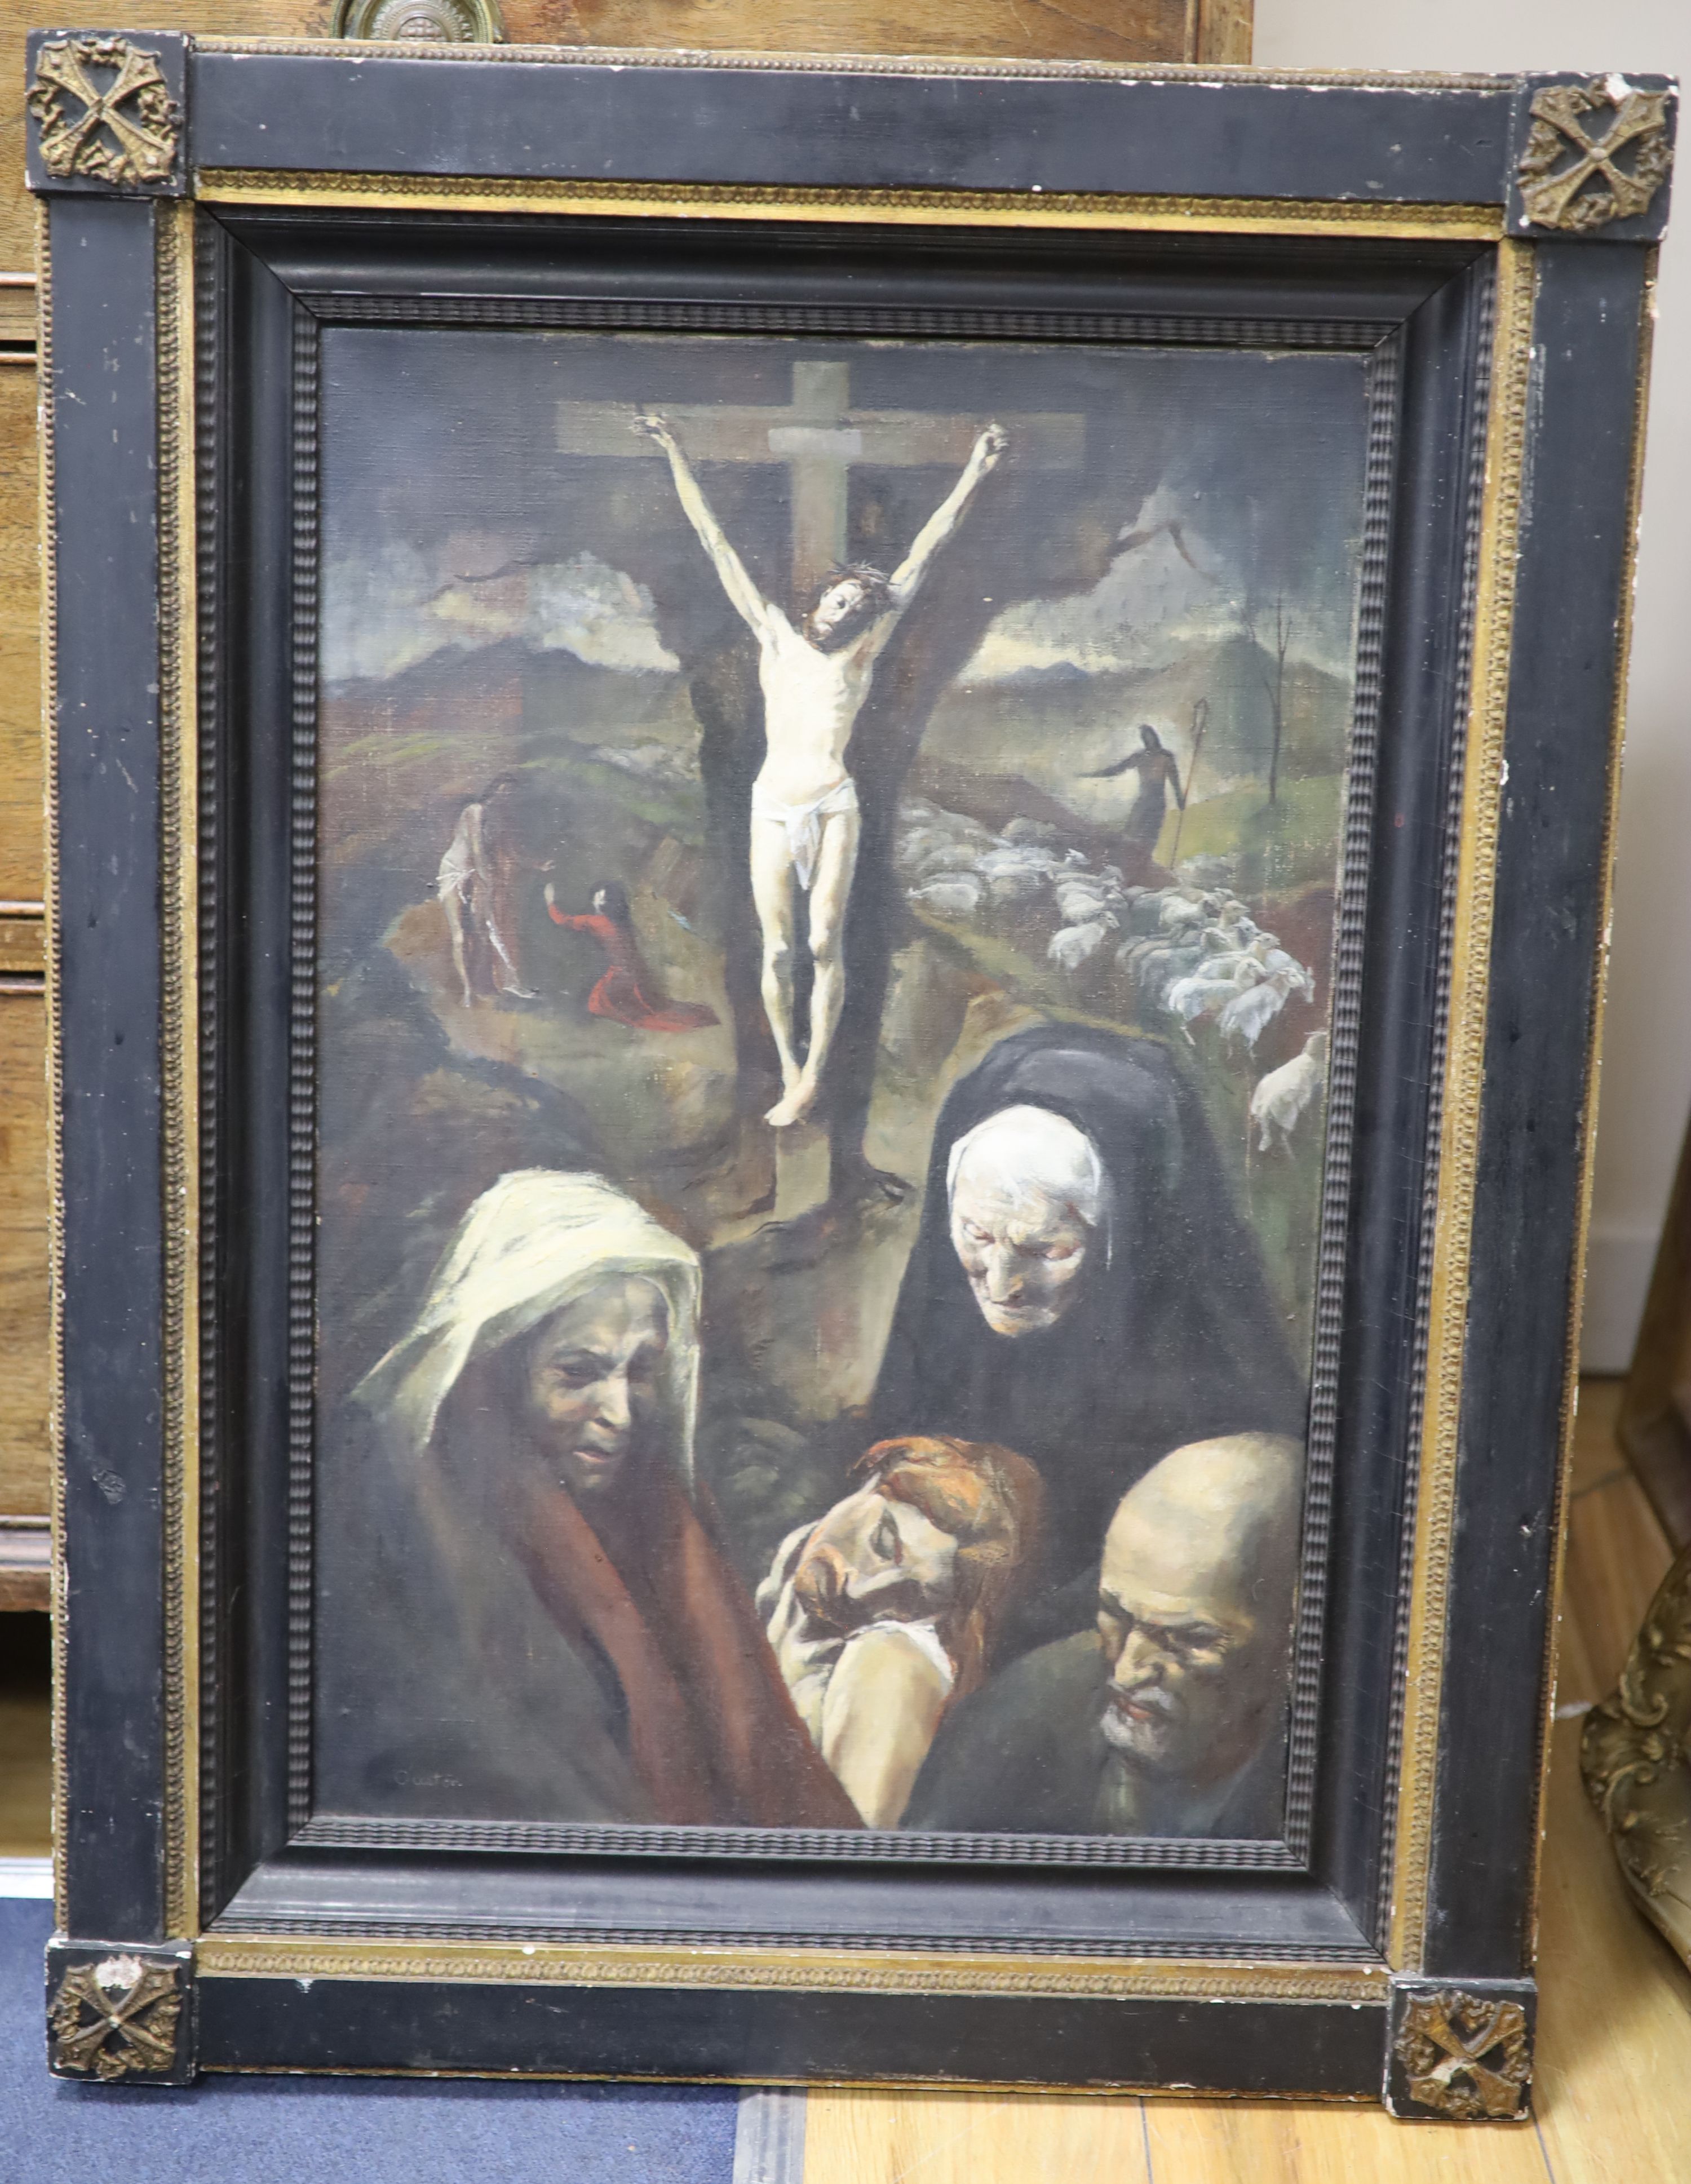 Ouston, oil on canvas, Crucifixion scene with details of the Life of Christ, signed, 60 x 40cm